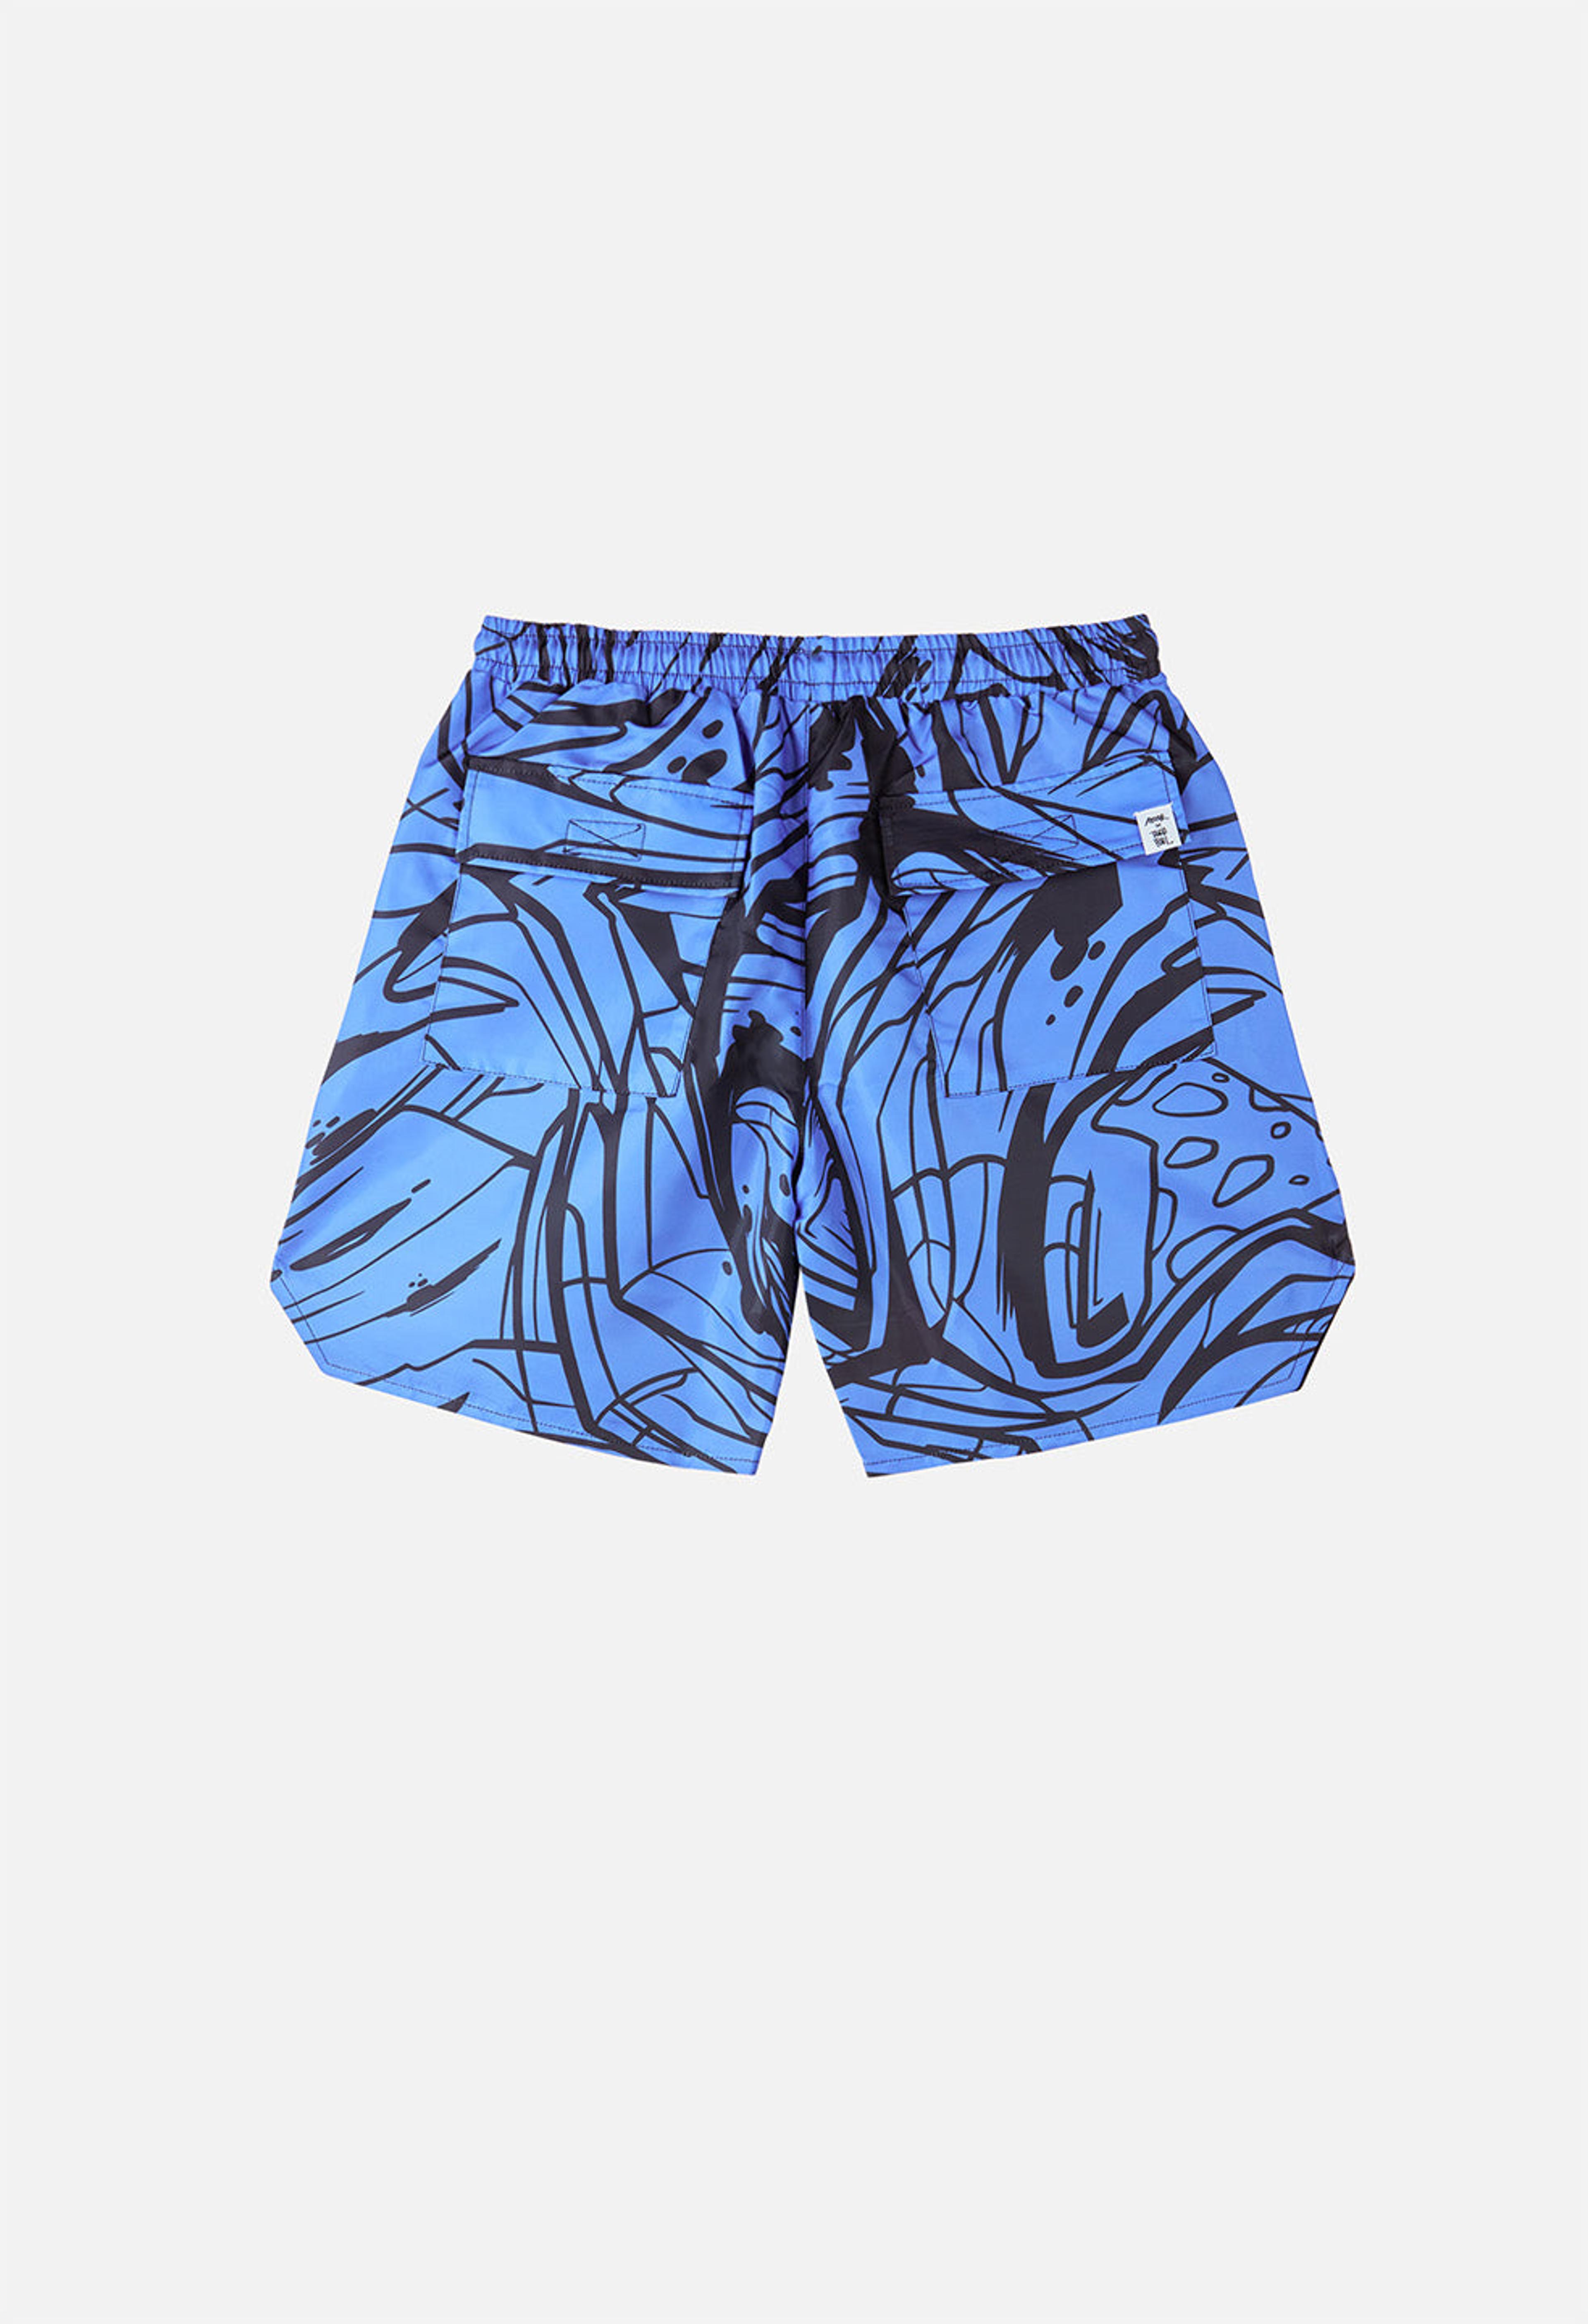 Alternate View 3 of ABSTRK Woven Shorts